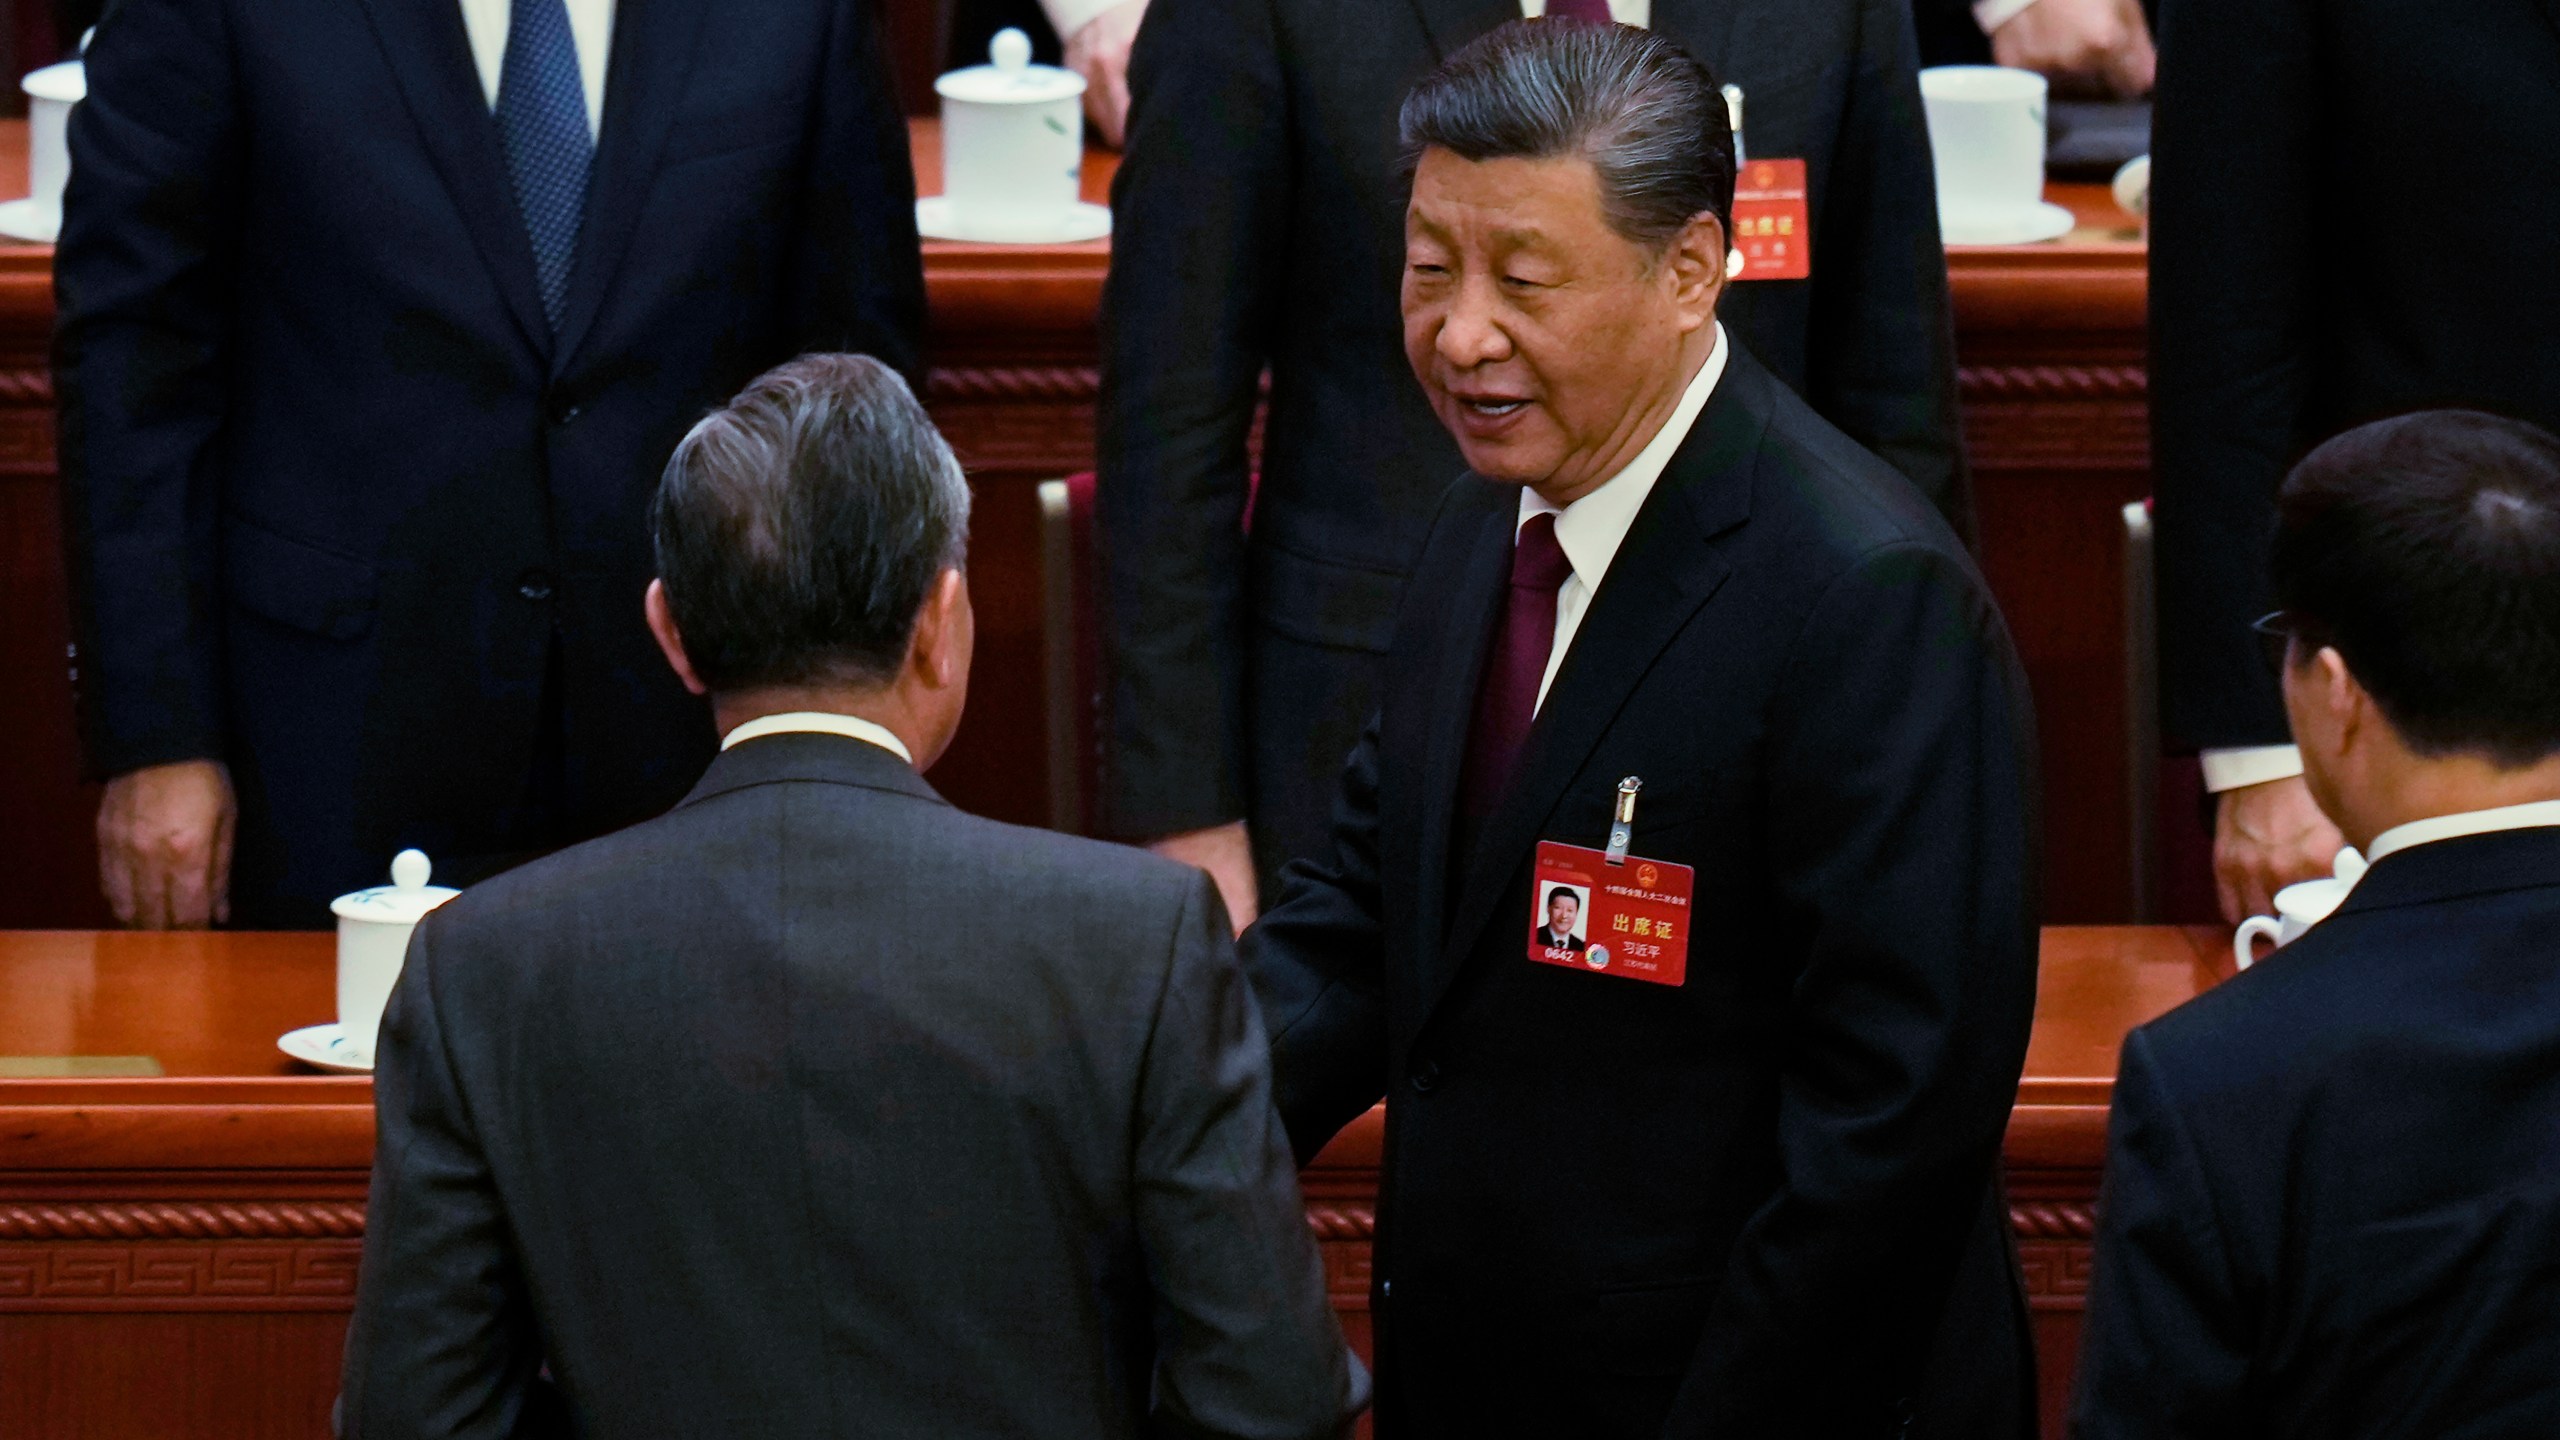 Chinese President Xi Jinping, right, chats with Foreign Minister Wang Yi as he leaves after the opening session of the National People's Congress (NPC) at the Great Hall of the People in Beijing, China, Tuesday, March 5, 2024. (AP Photo/Ng Han Guan)